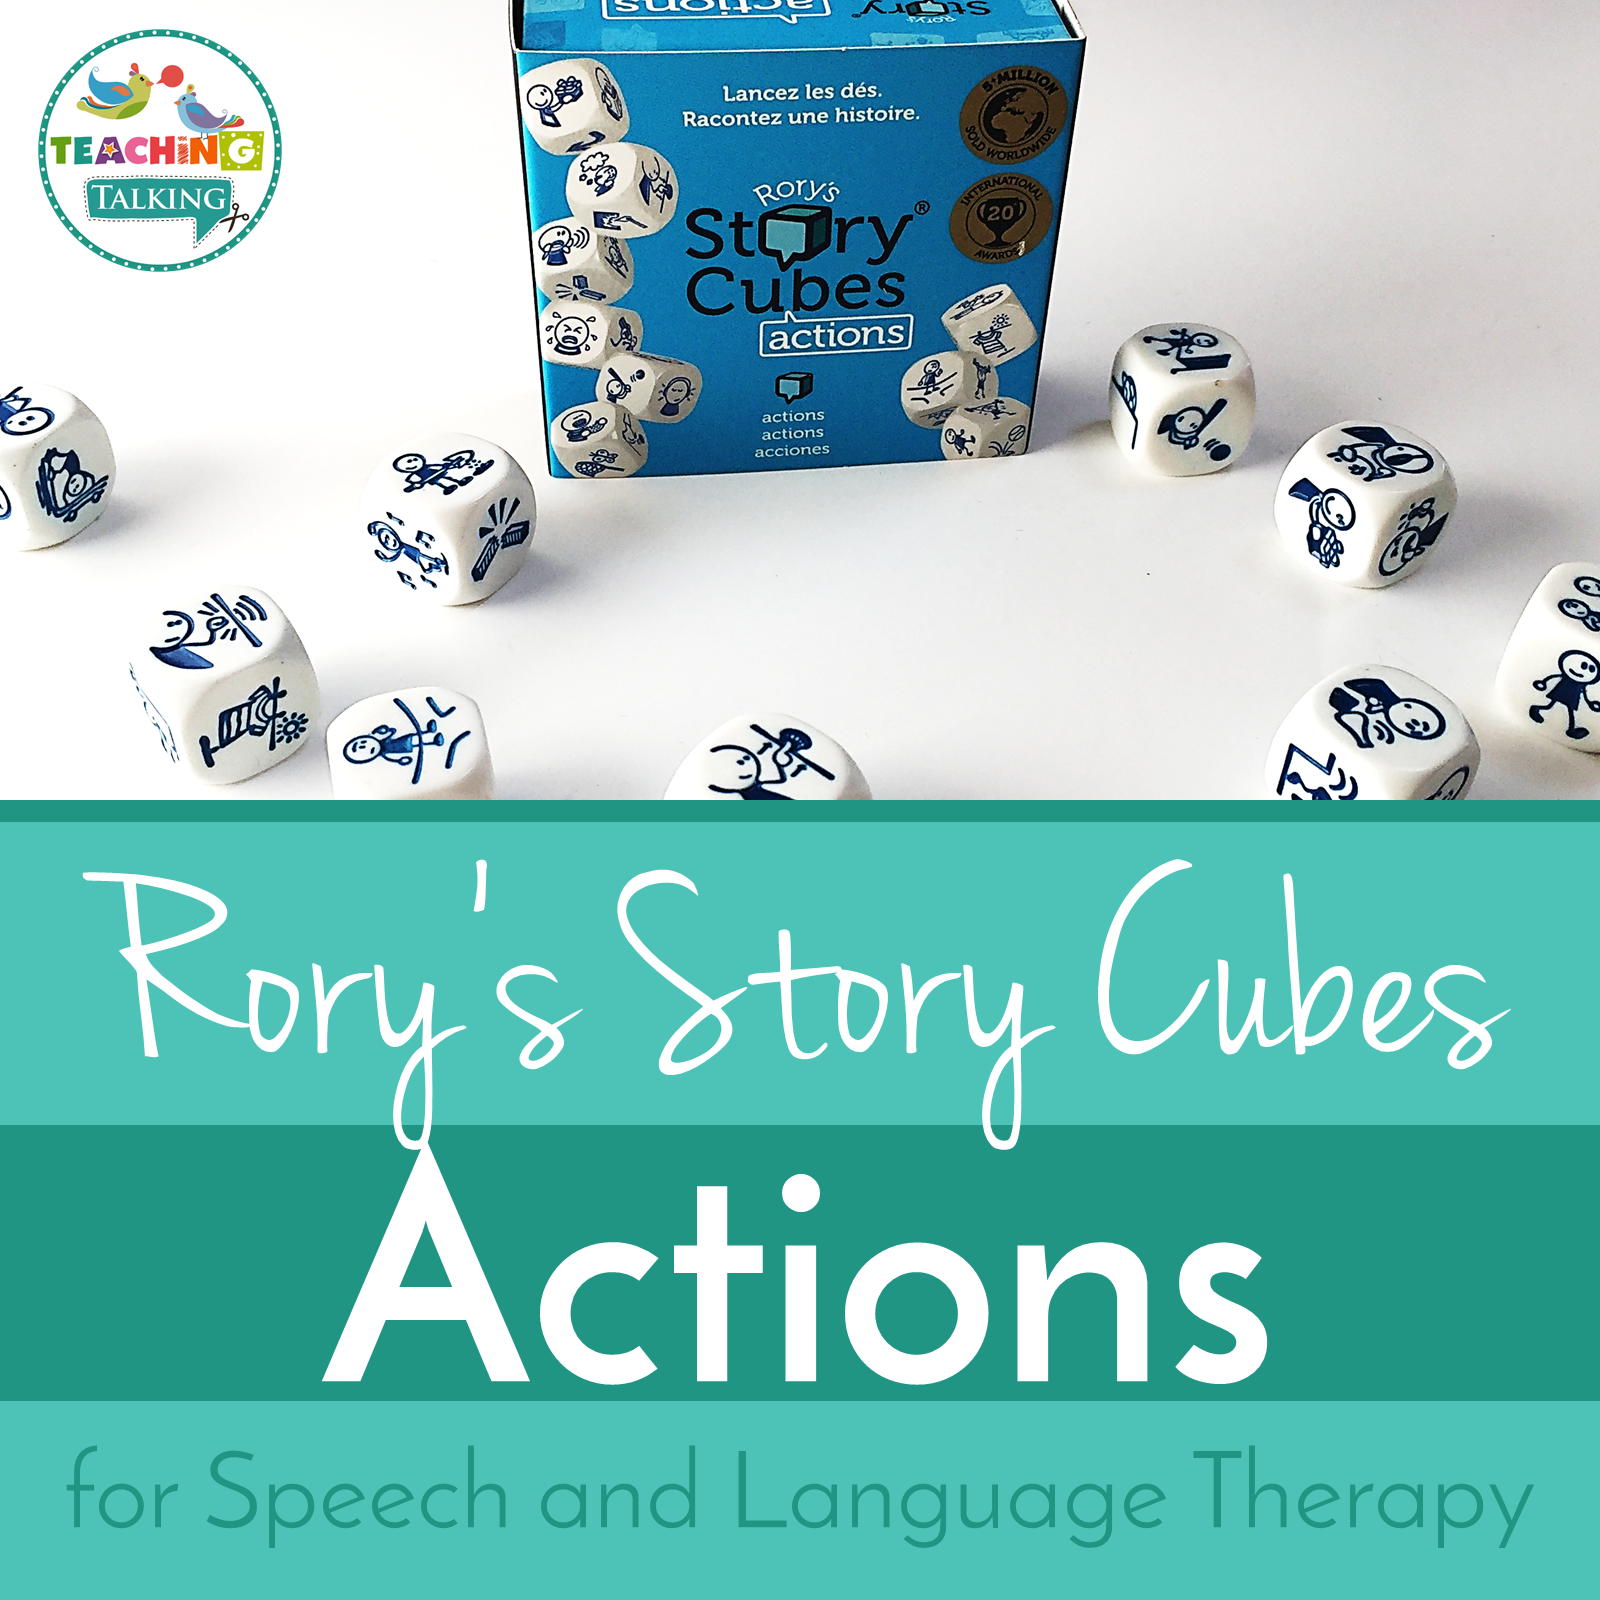 Here are Rory's Story Cubes